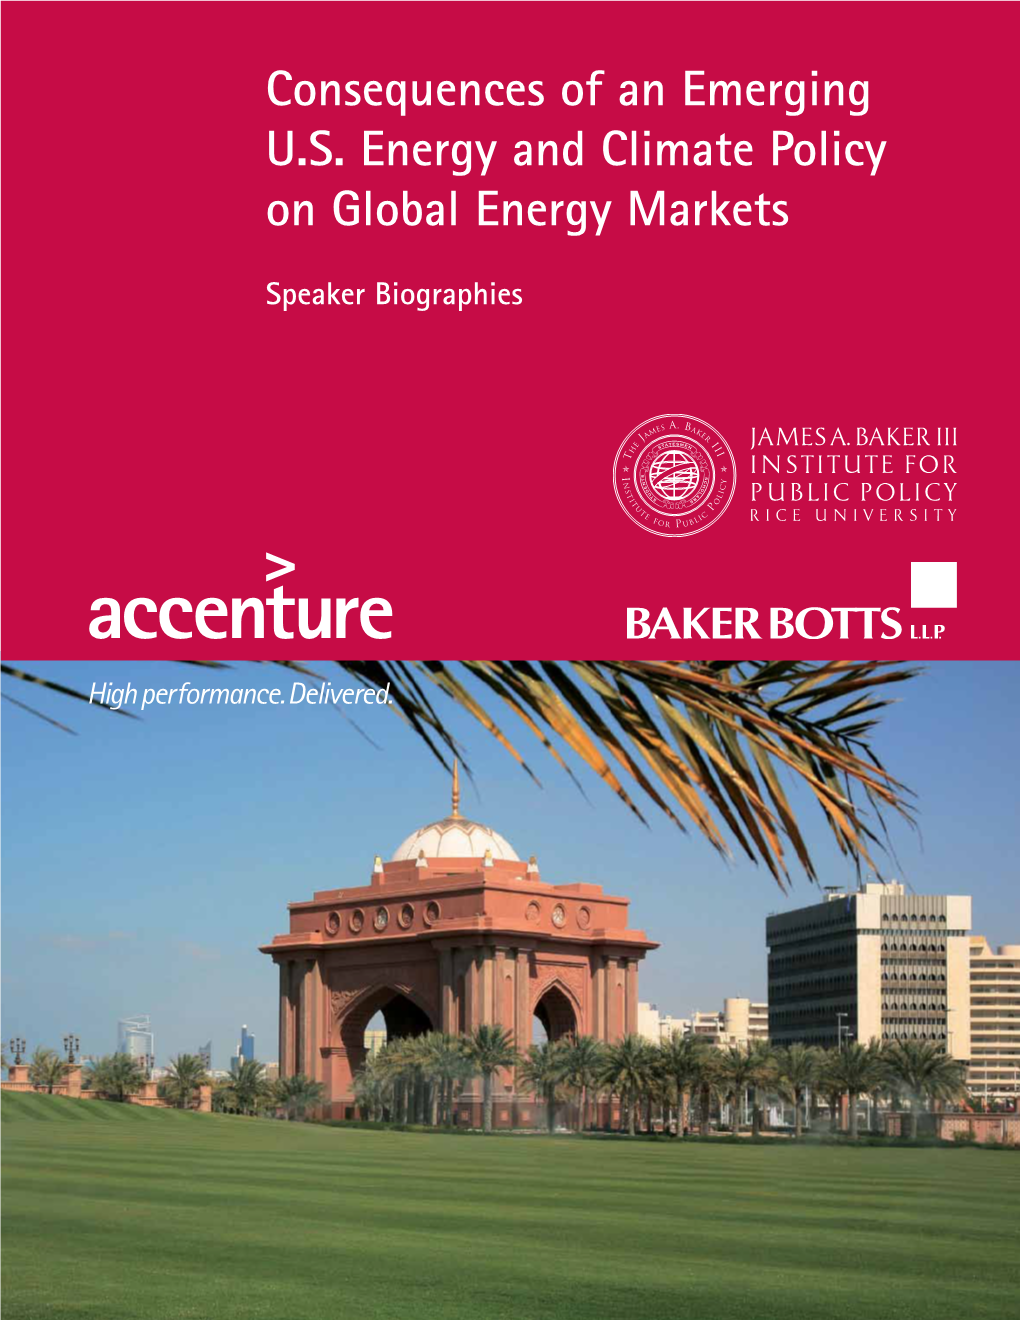 Consequences of an Emerging U.S. Energy and Climate Policy on Global Energy Markets